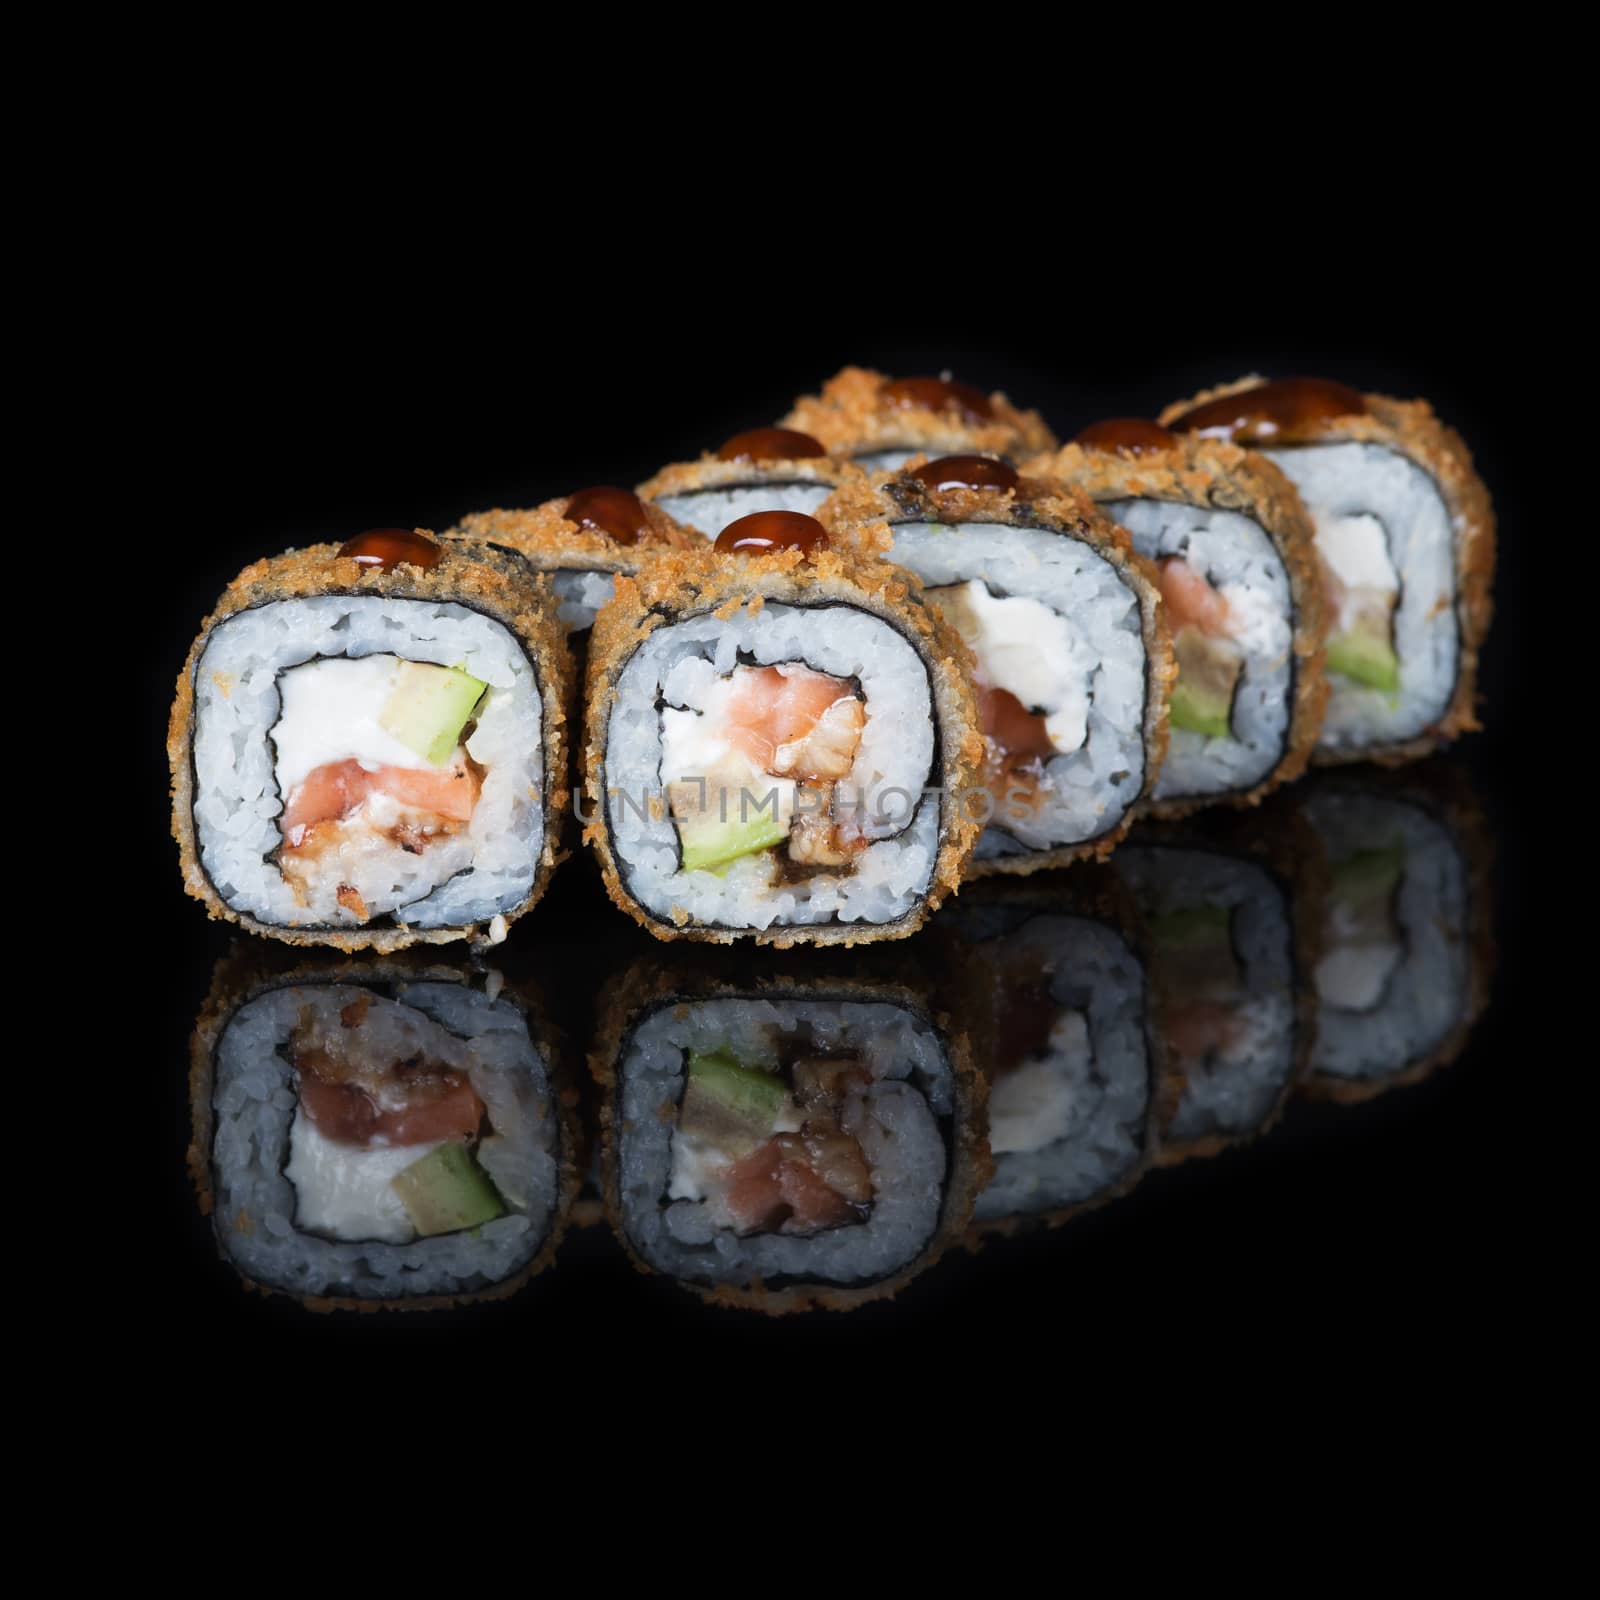 Grilled sushi rolls with fish and sause by kzen